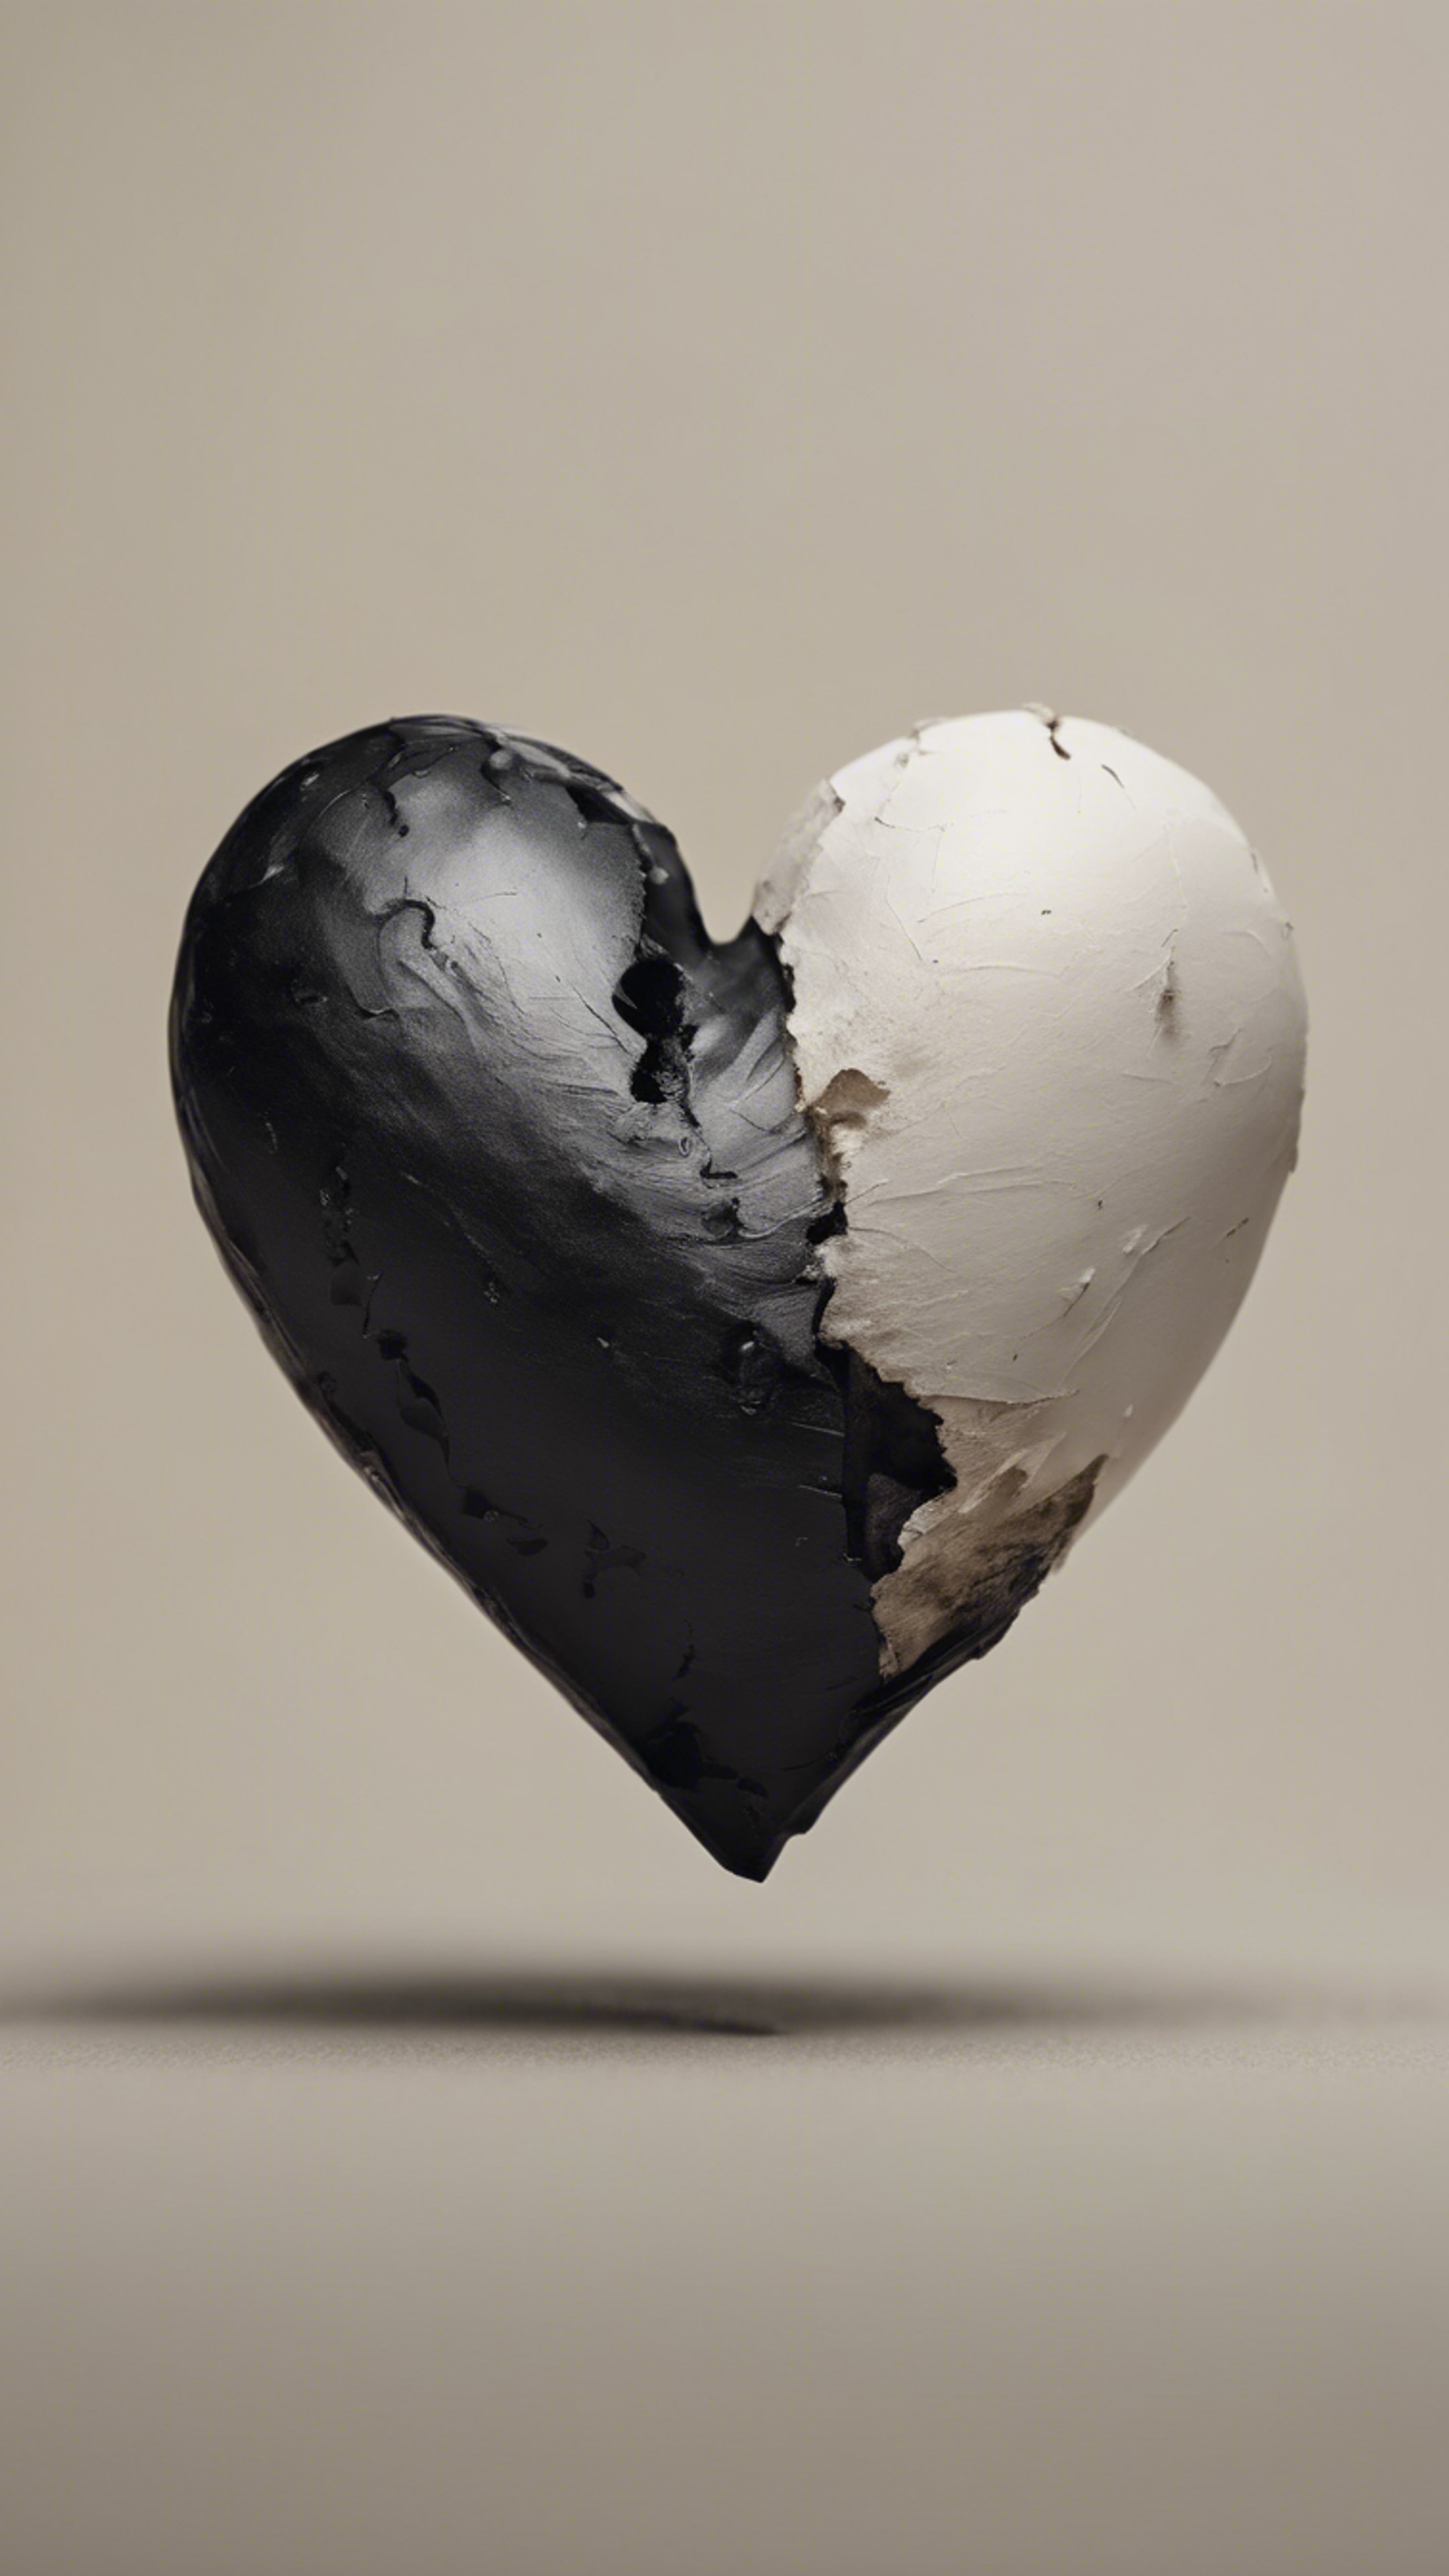 A black heart on one side and a white heart on the other side, against a neutral color background. Tapeta[e1ad96bec27b409fa1a8]